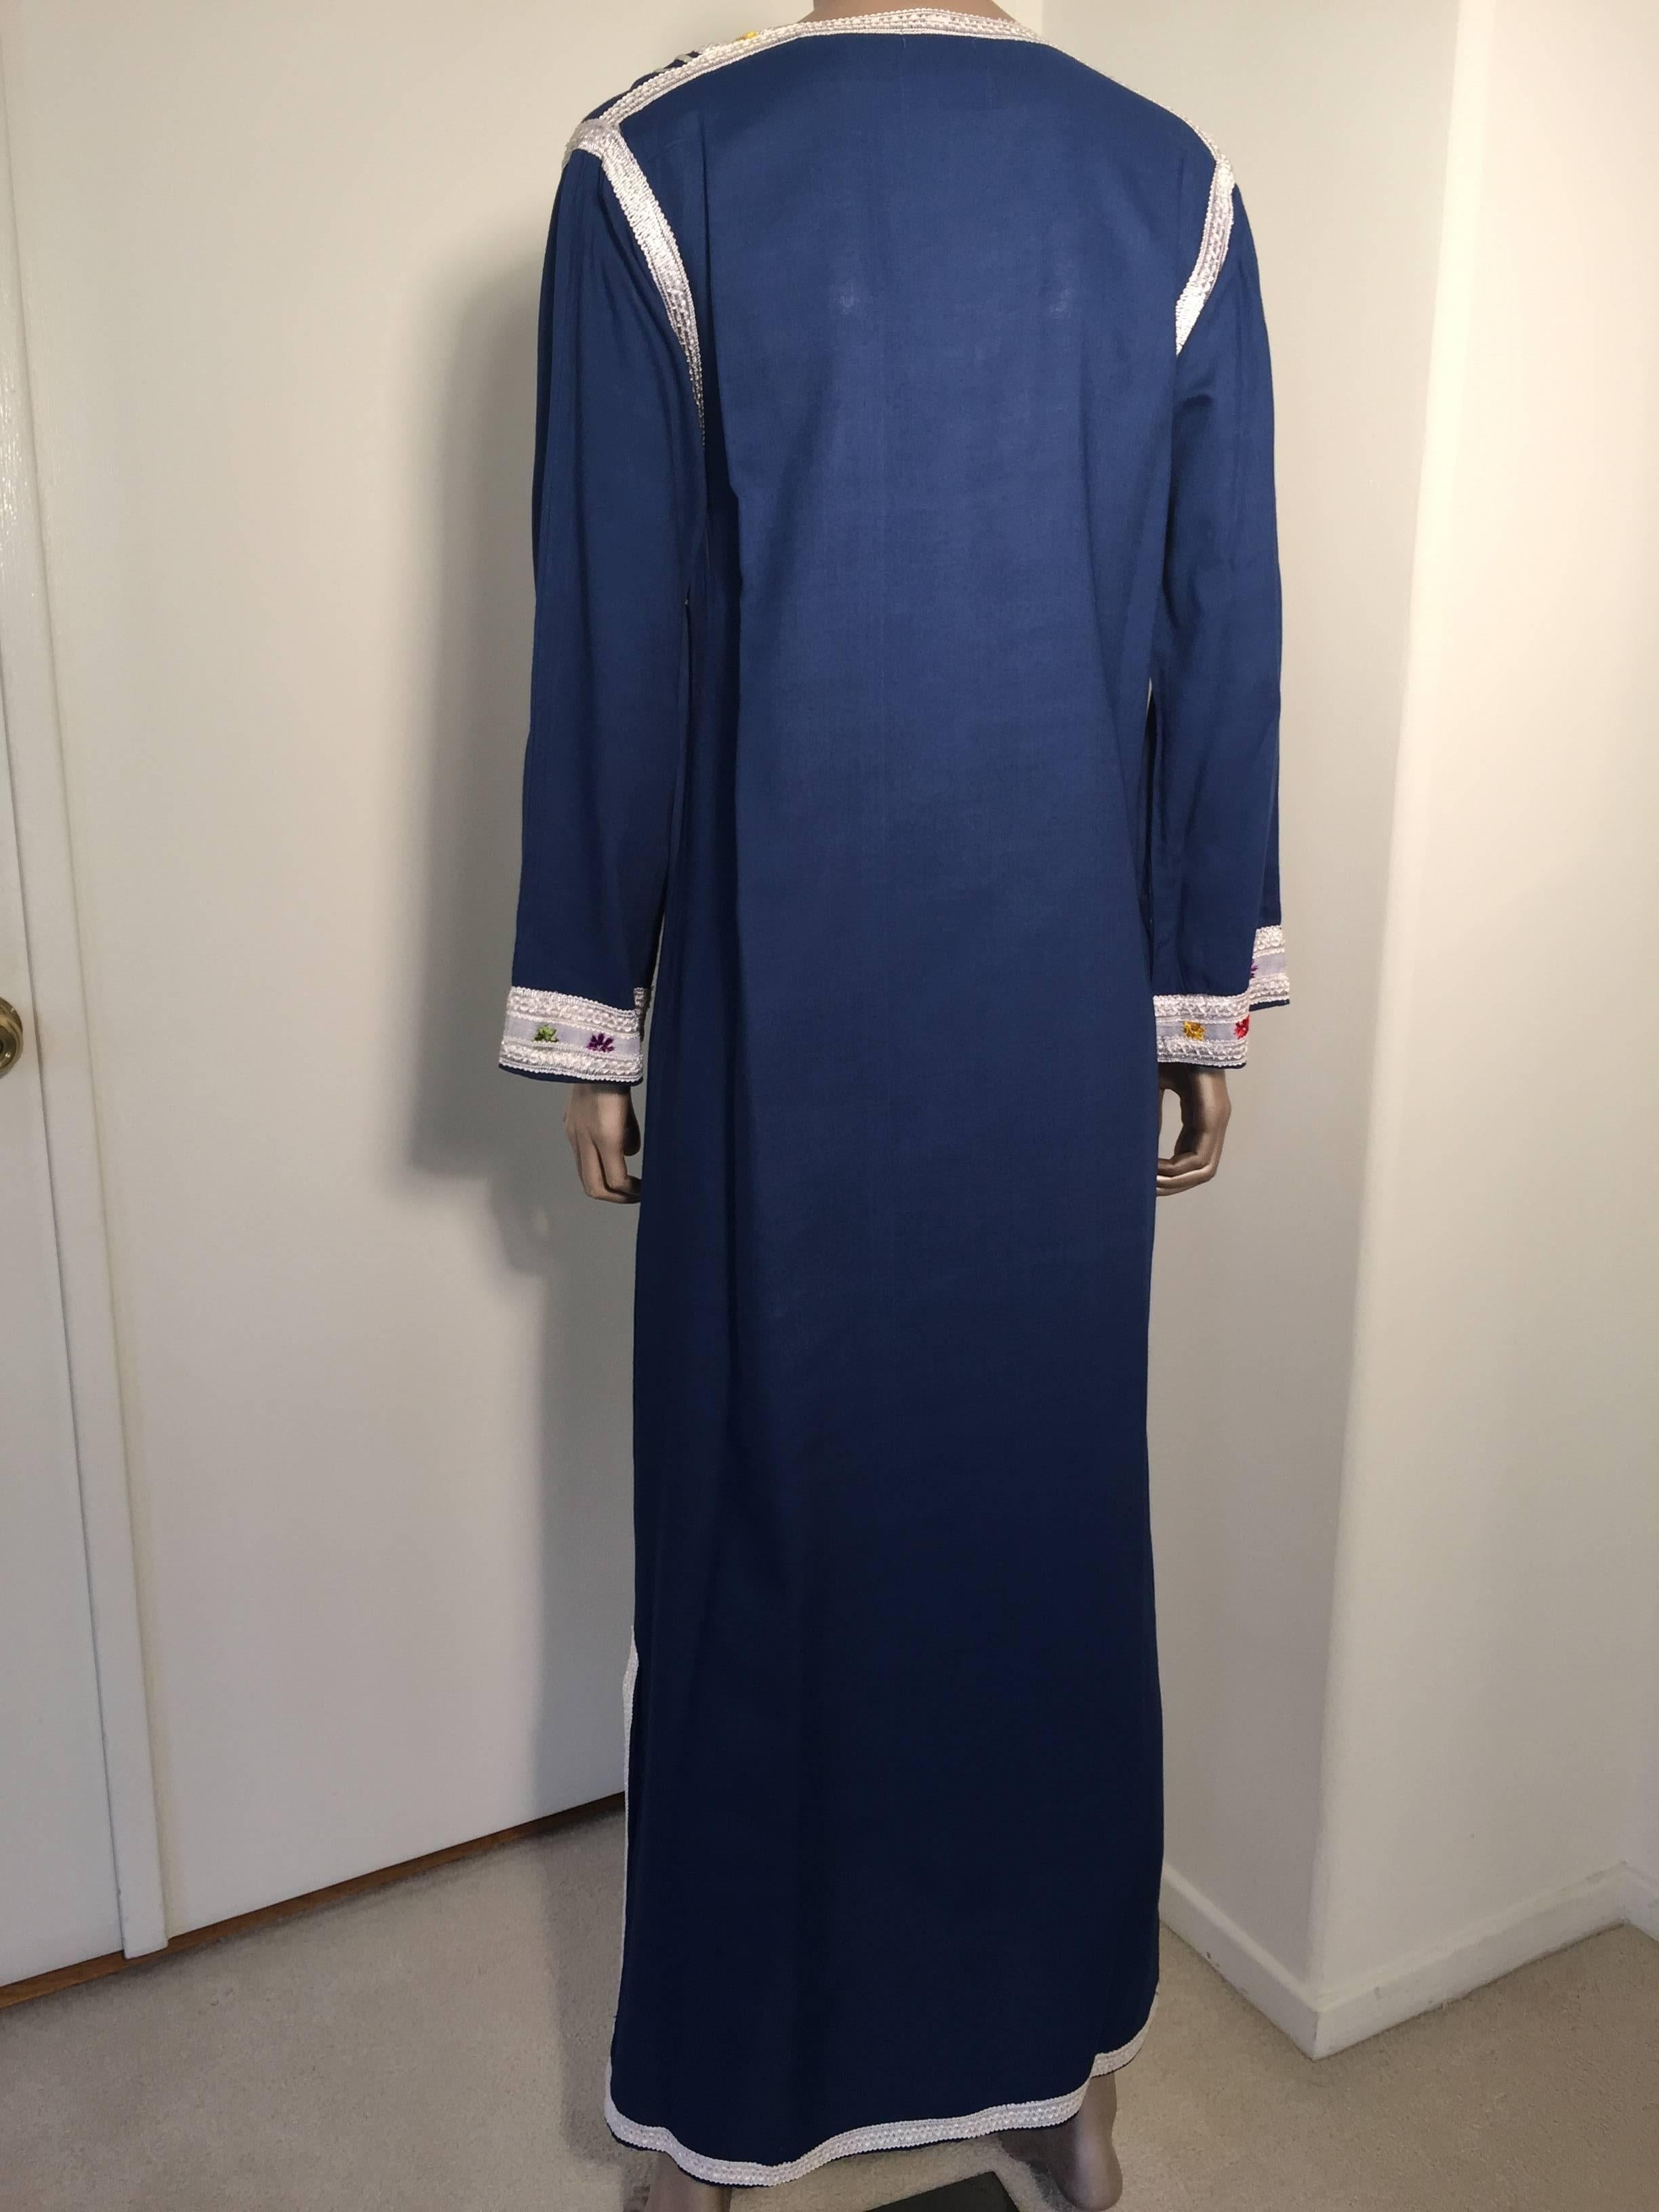 Moroccan Vintage Blue Caftan, 1970 Maxi Dress Kaftan by Glenn Boston Size M In Good Condition For Sale In North Hollywood, CA